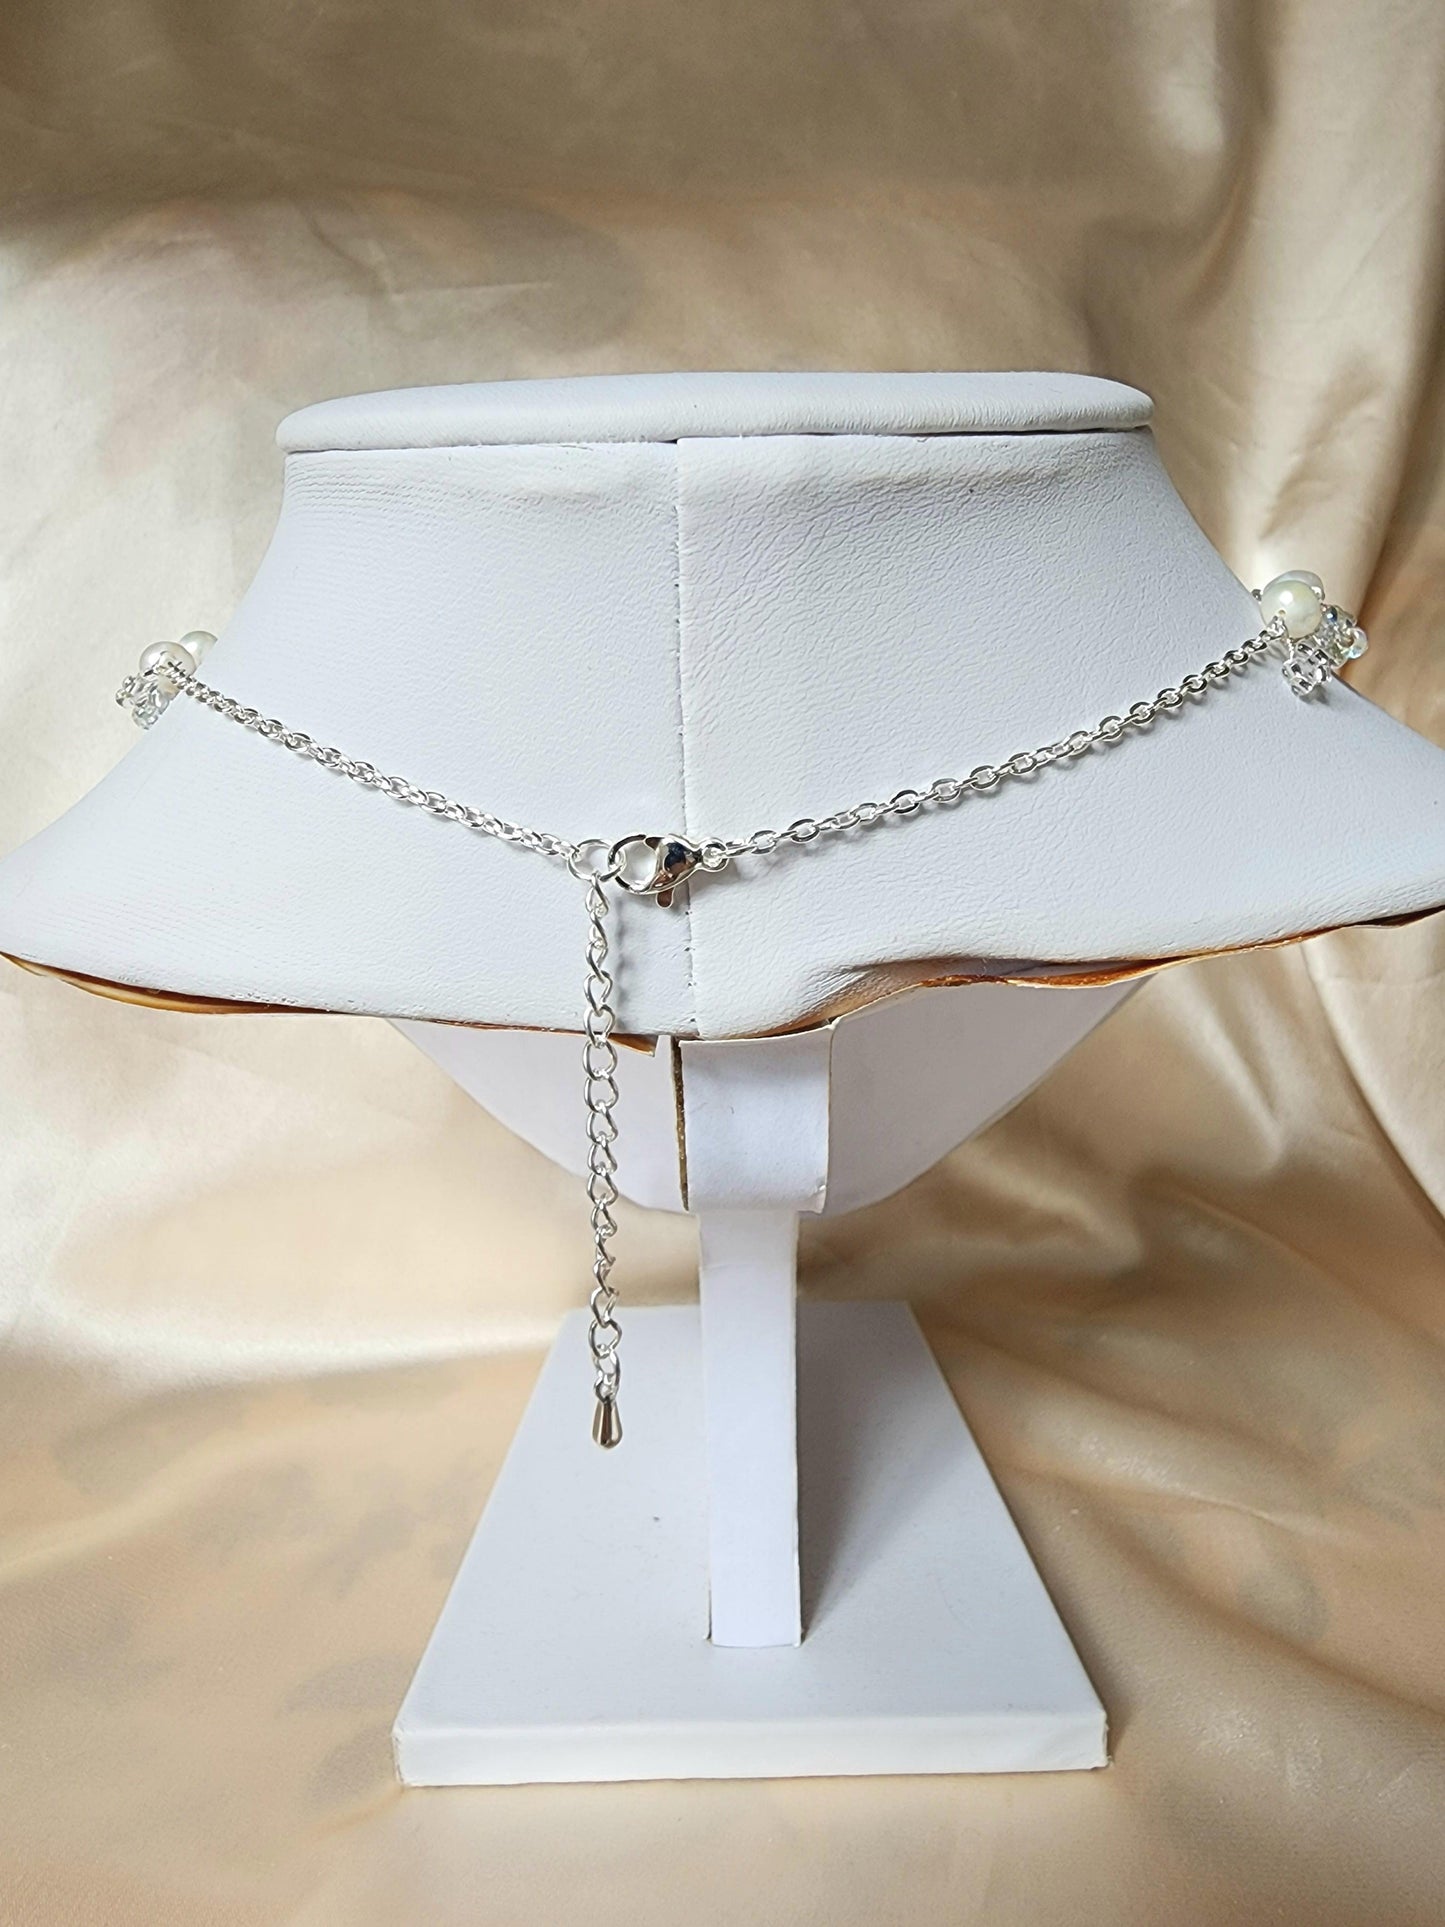 White Camellia Pearl Necklace - By Cocoyu